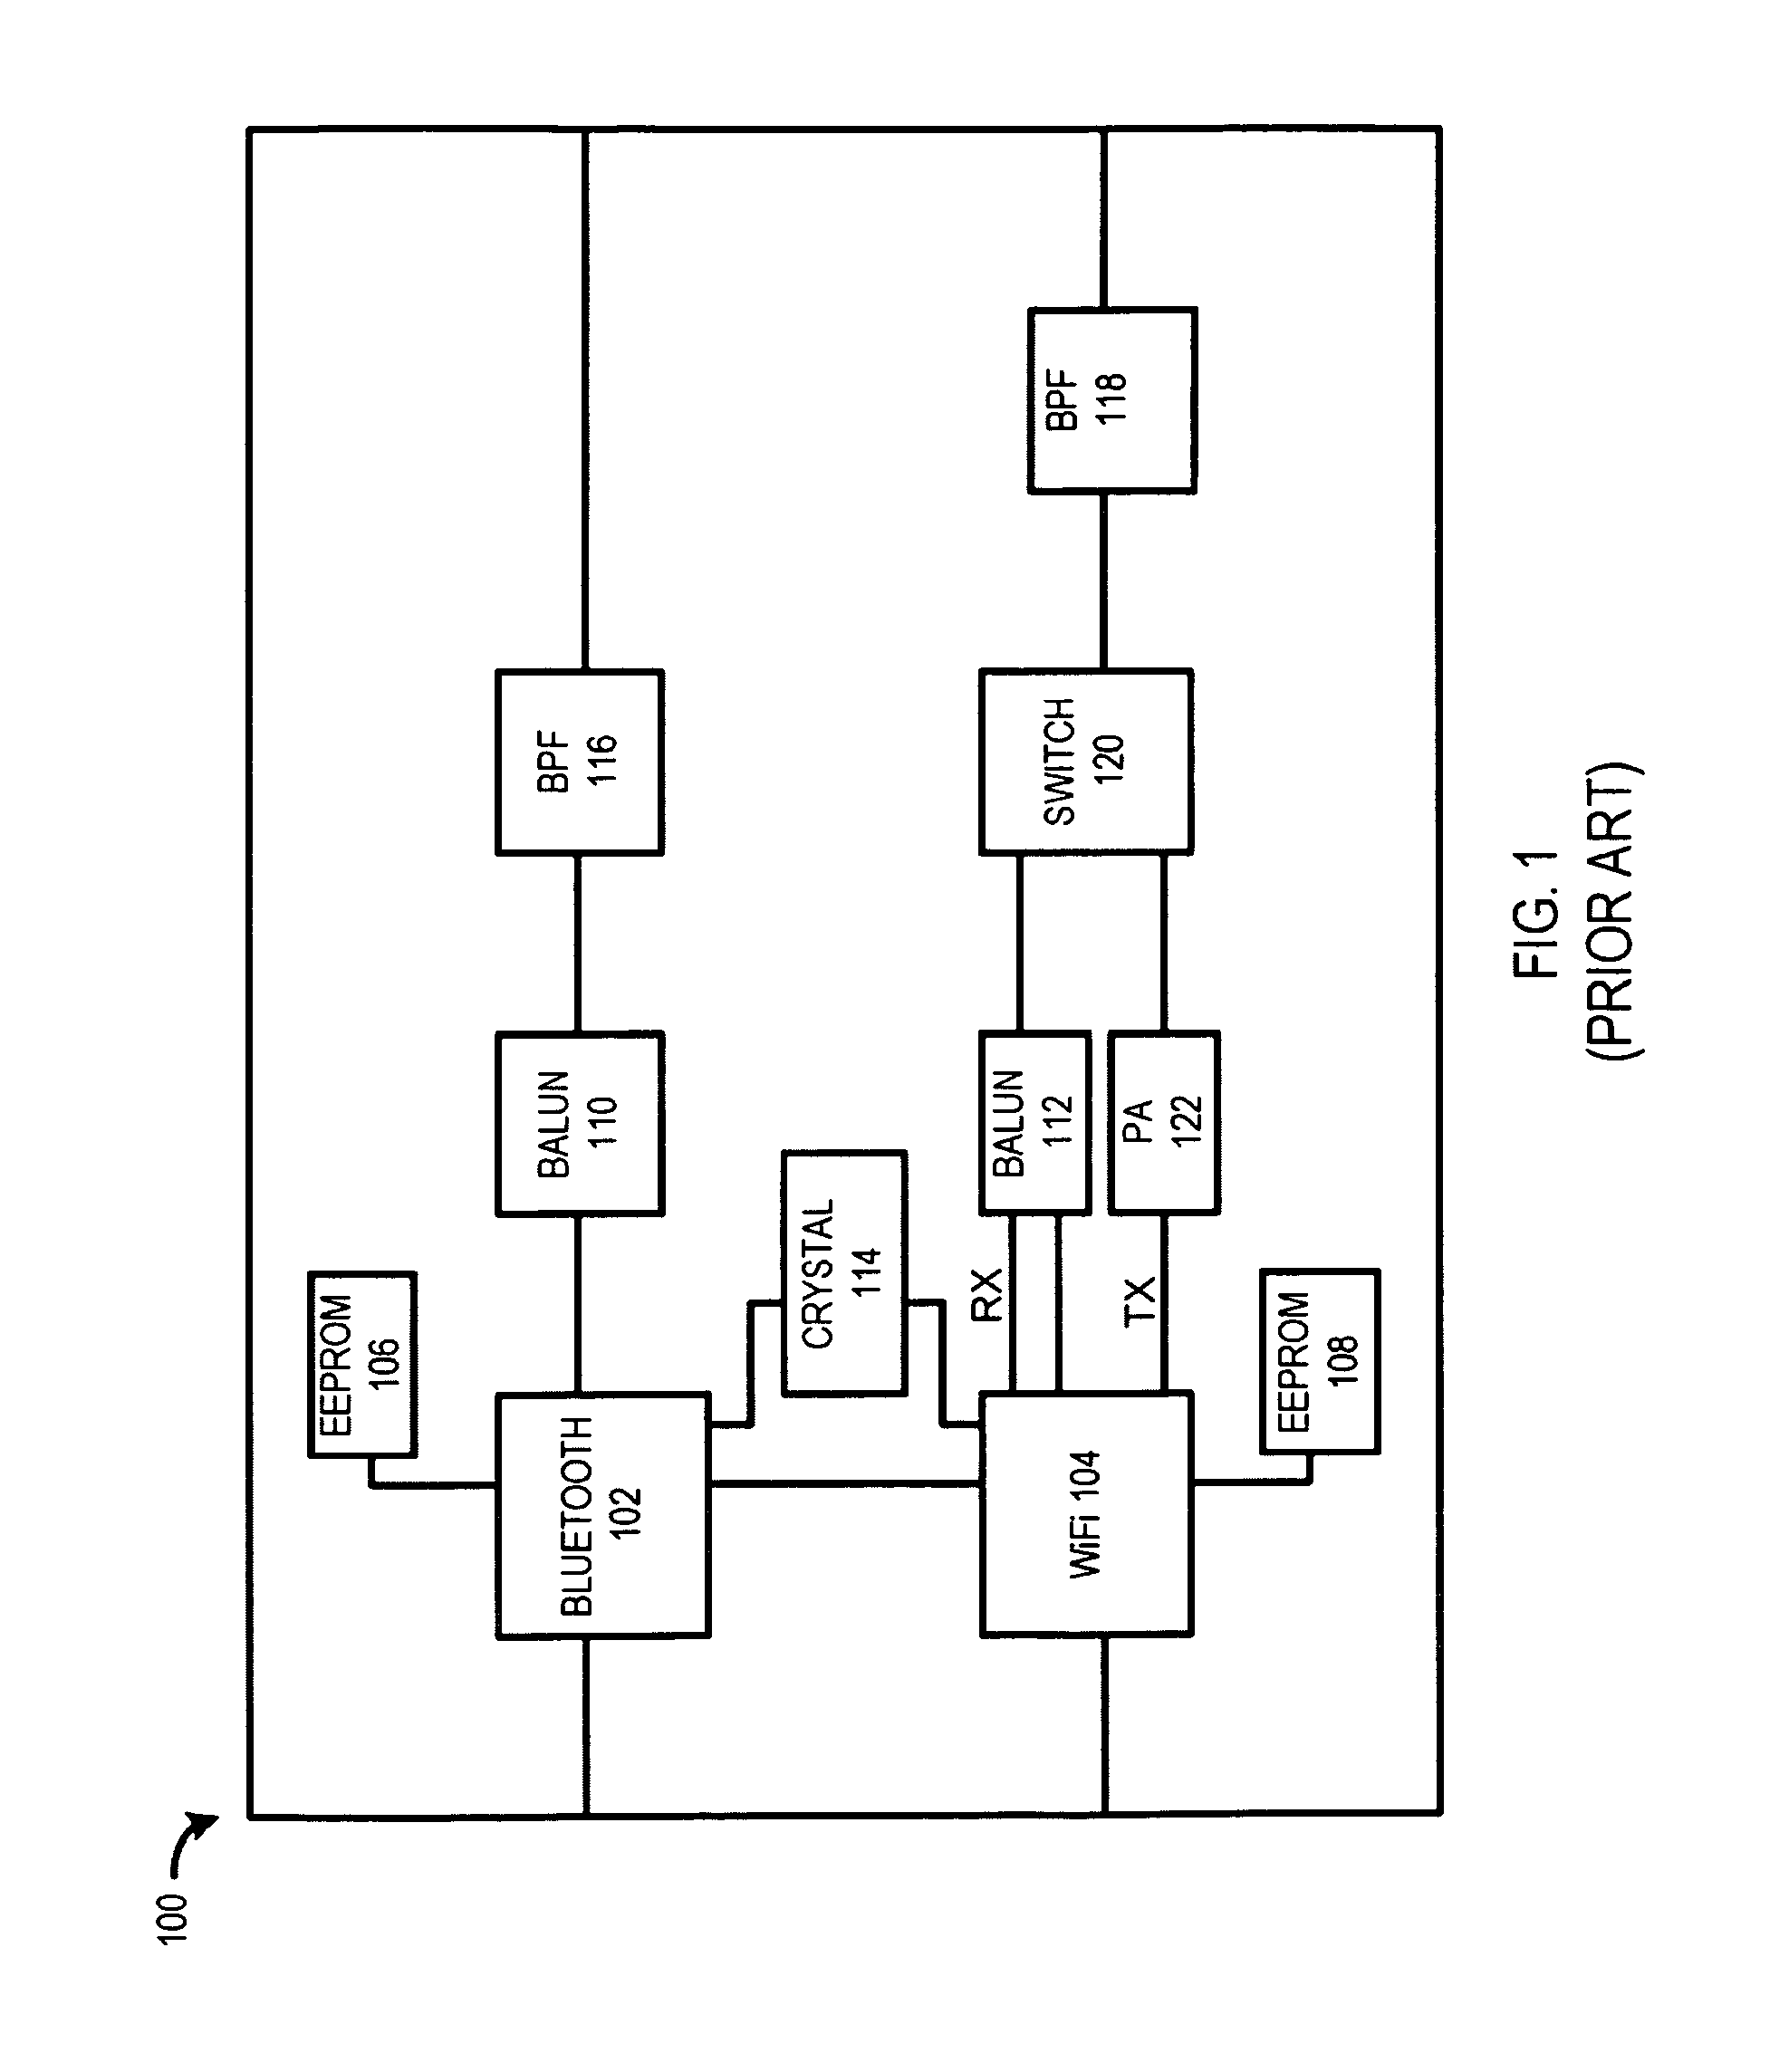 Built-in-self-repair arrangement for a single multiple-integrated circuit package and methods thereof